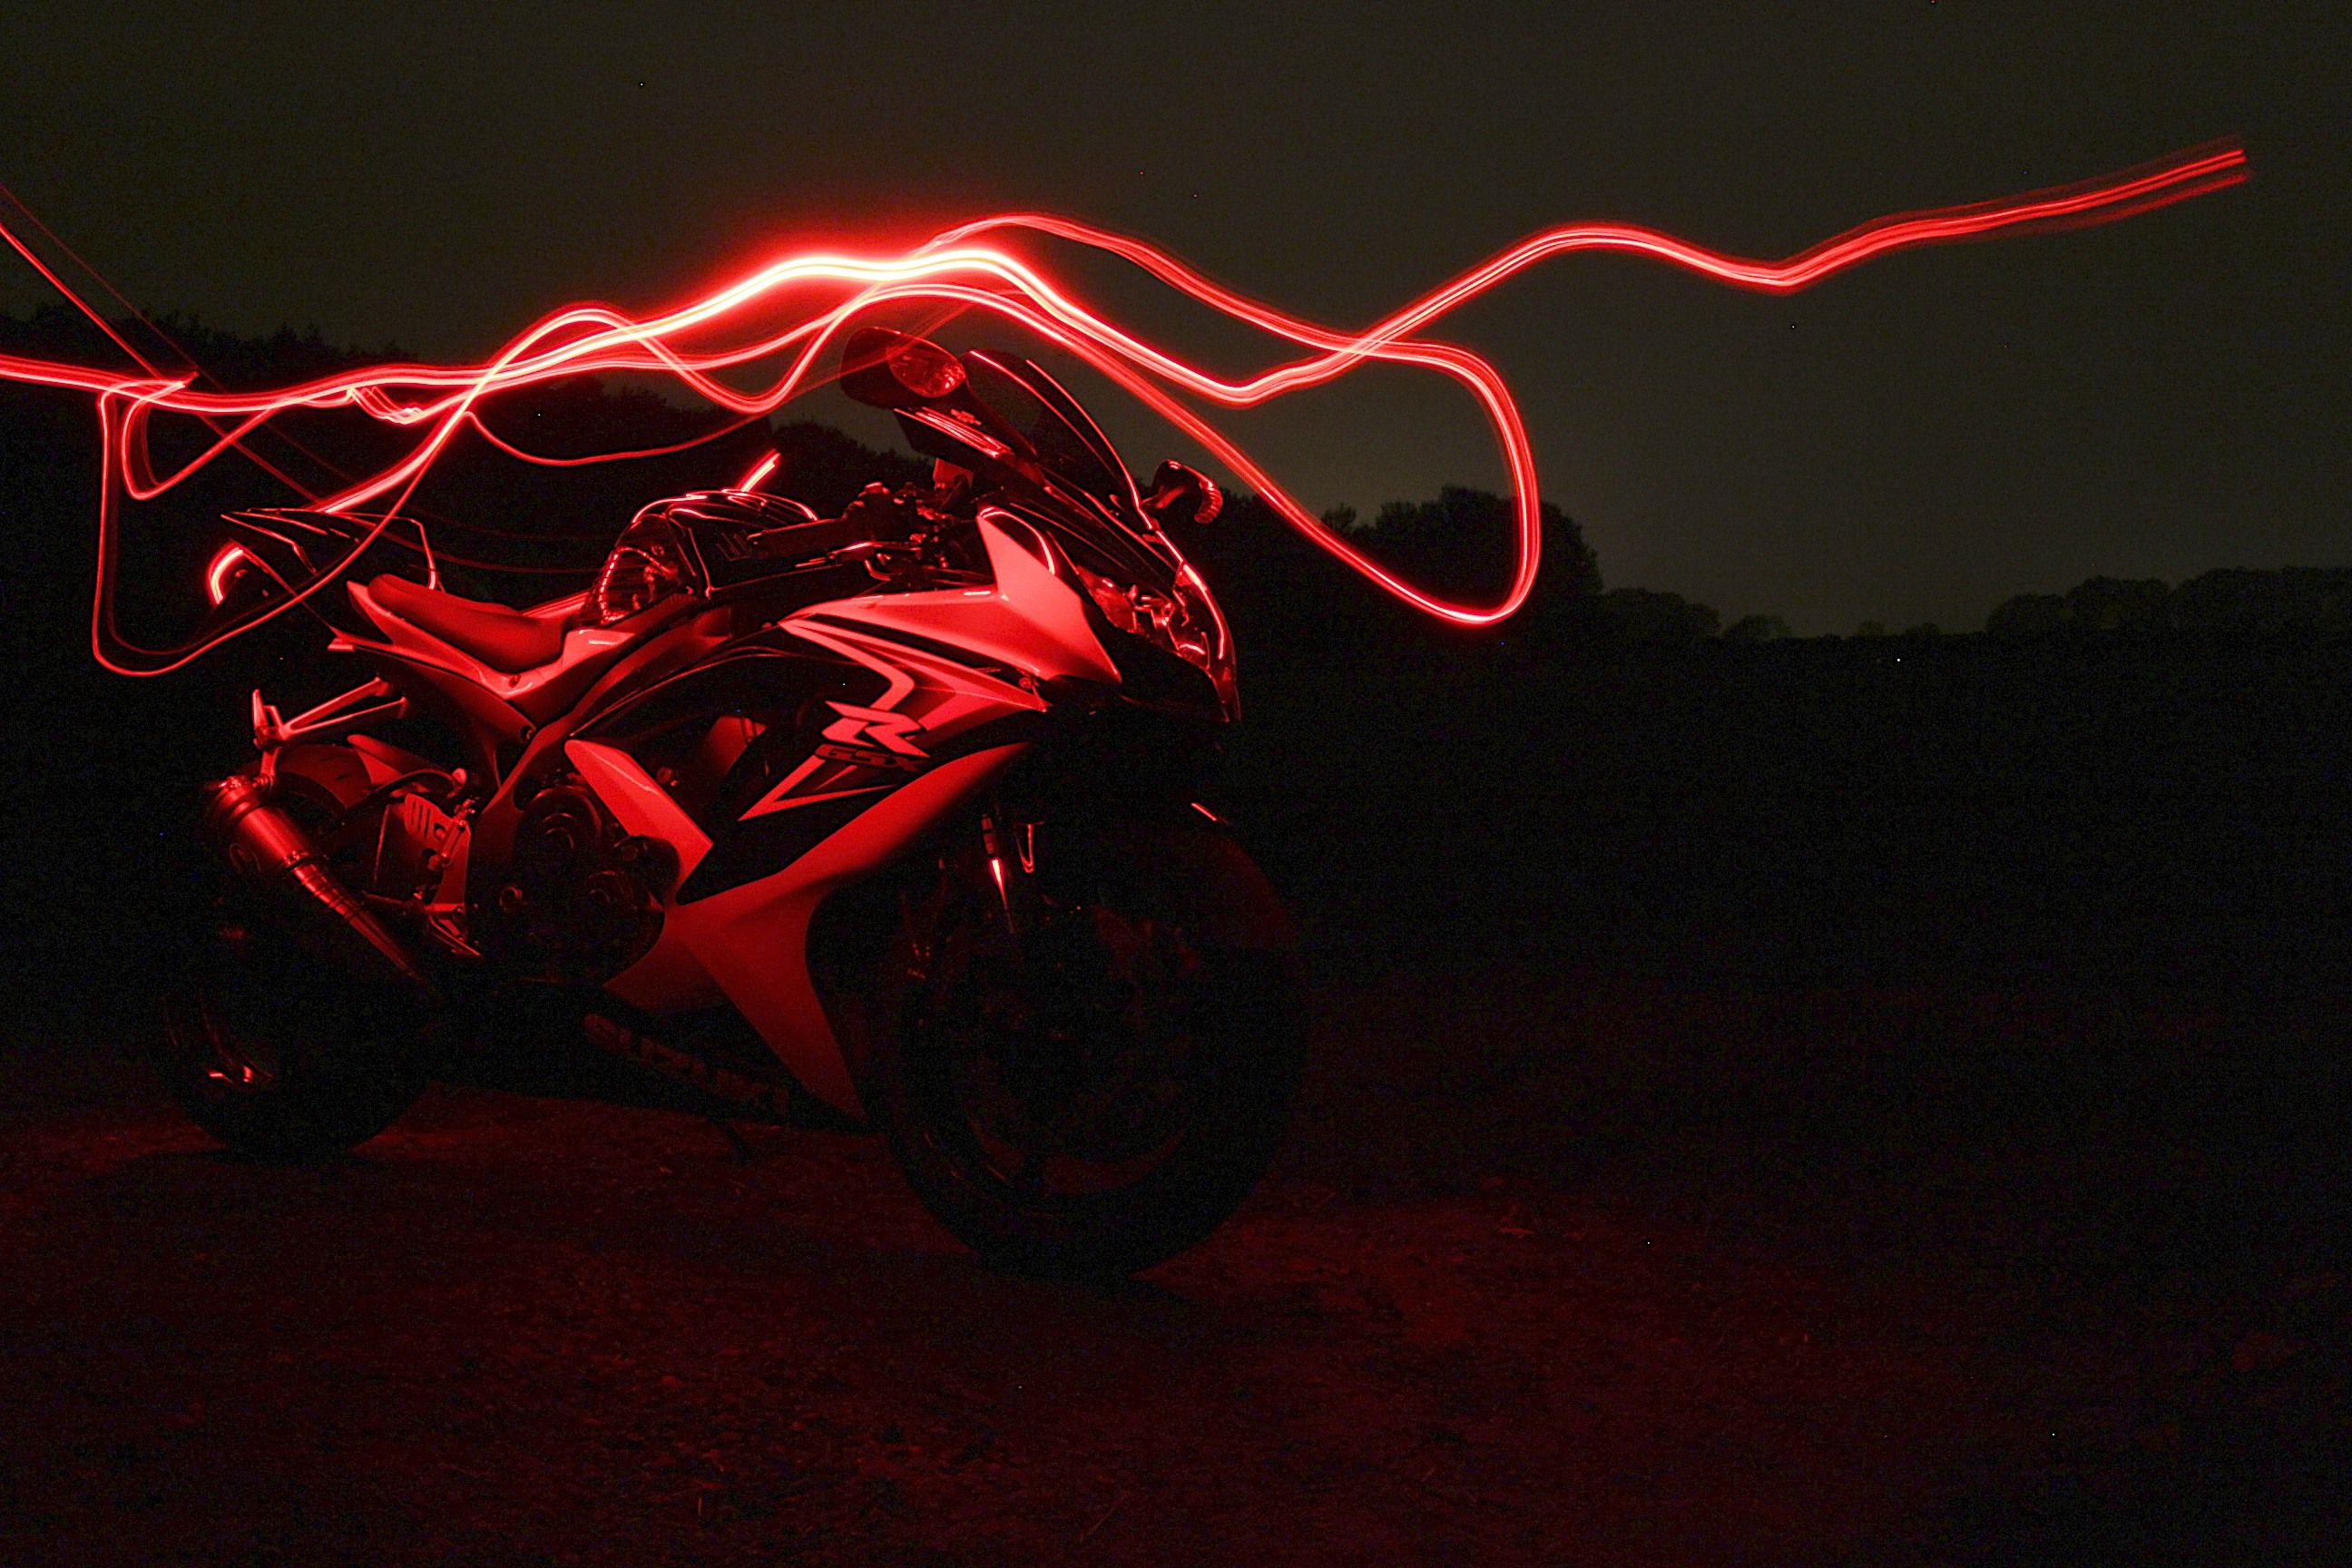 A motorcycle is illuminated by a red light. - Light red, neon red